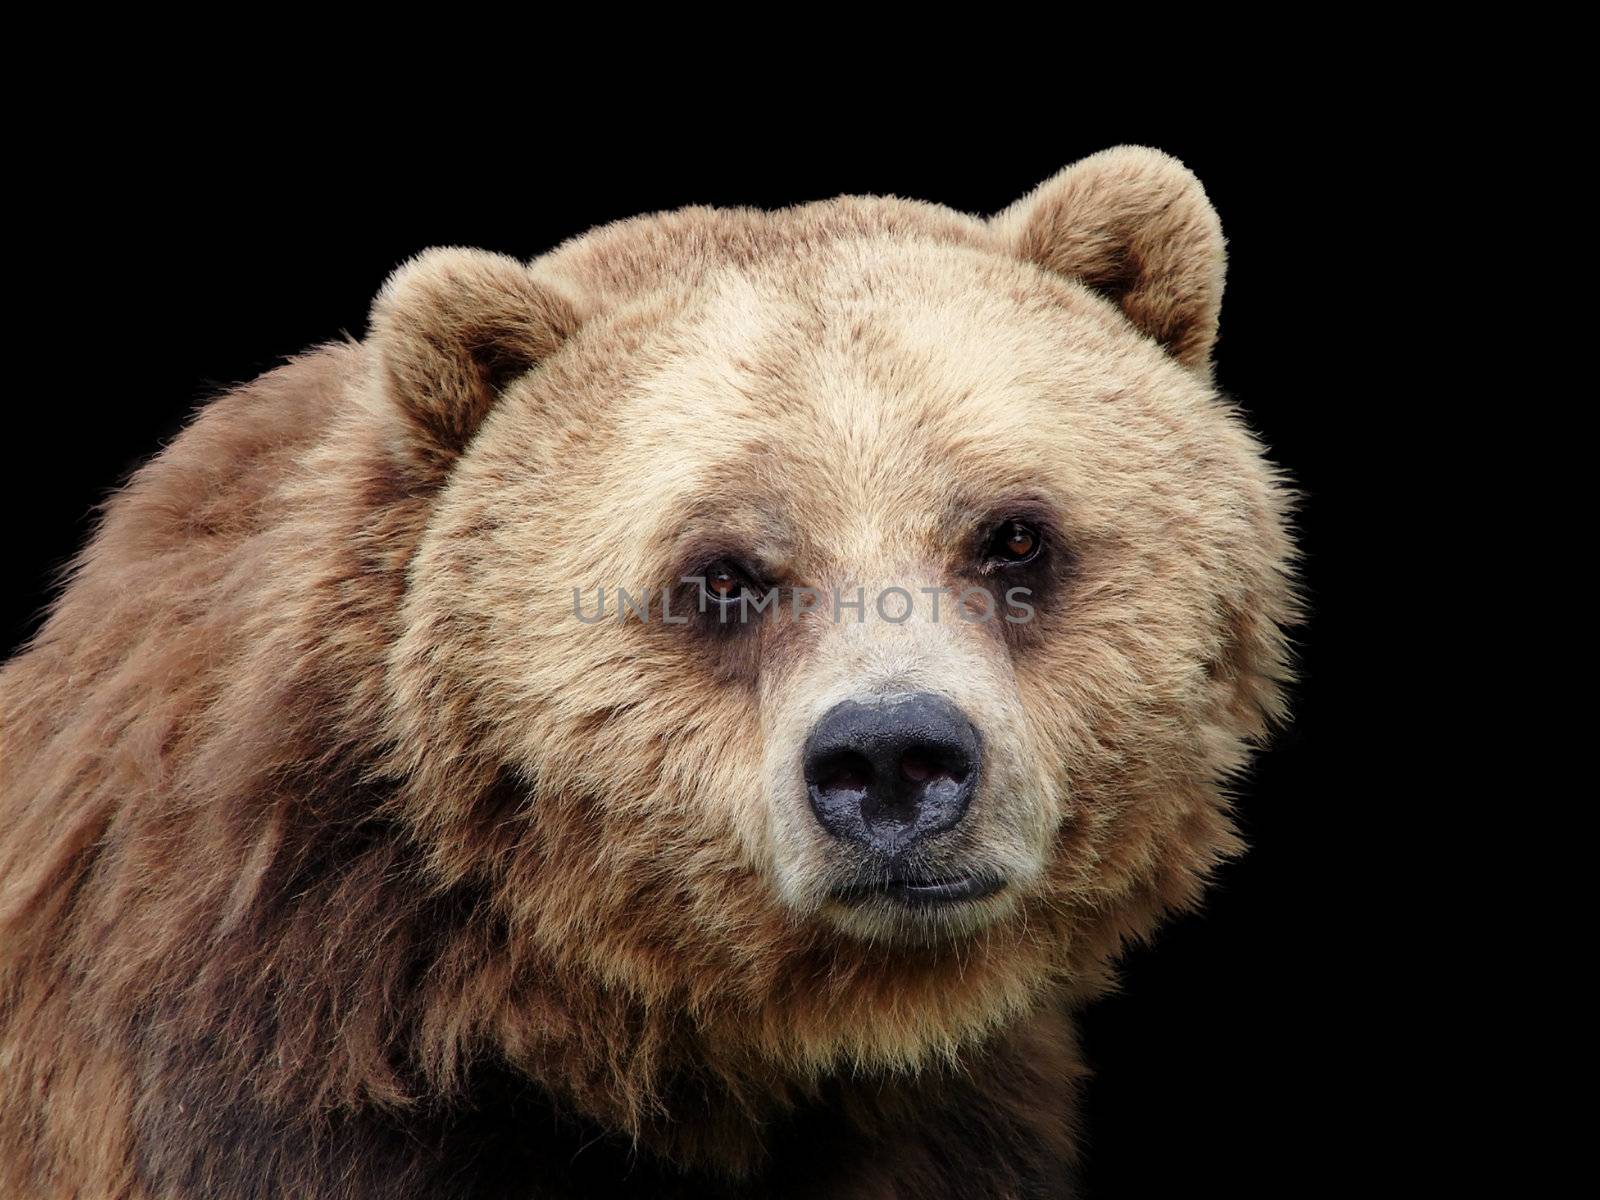 Sad grizzly brown bear looking at camera, lots of details, isolated on black background.